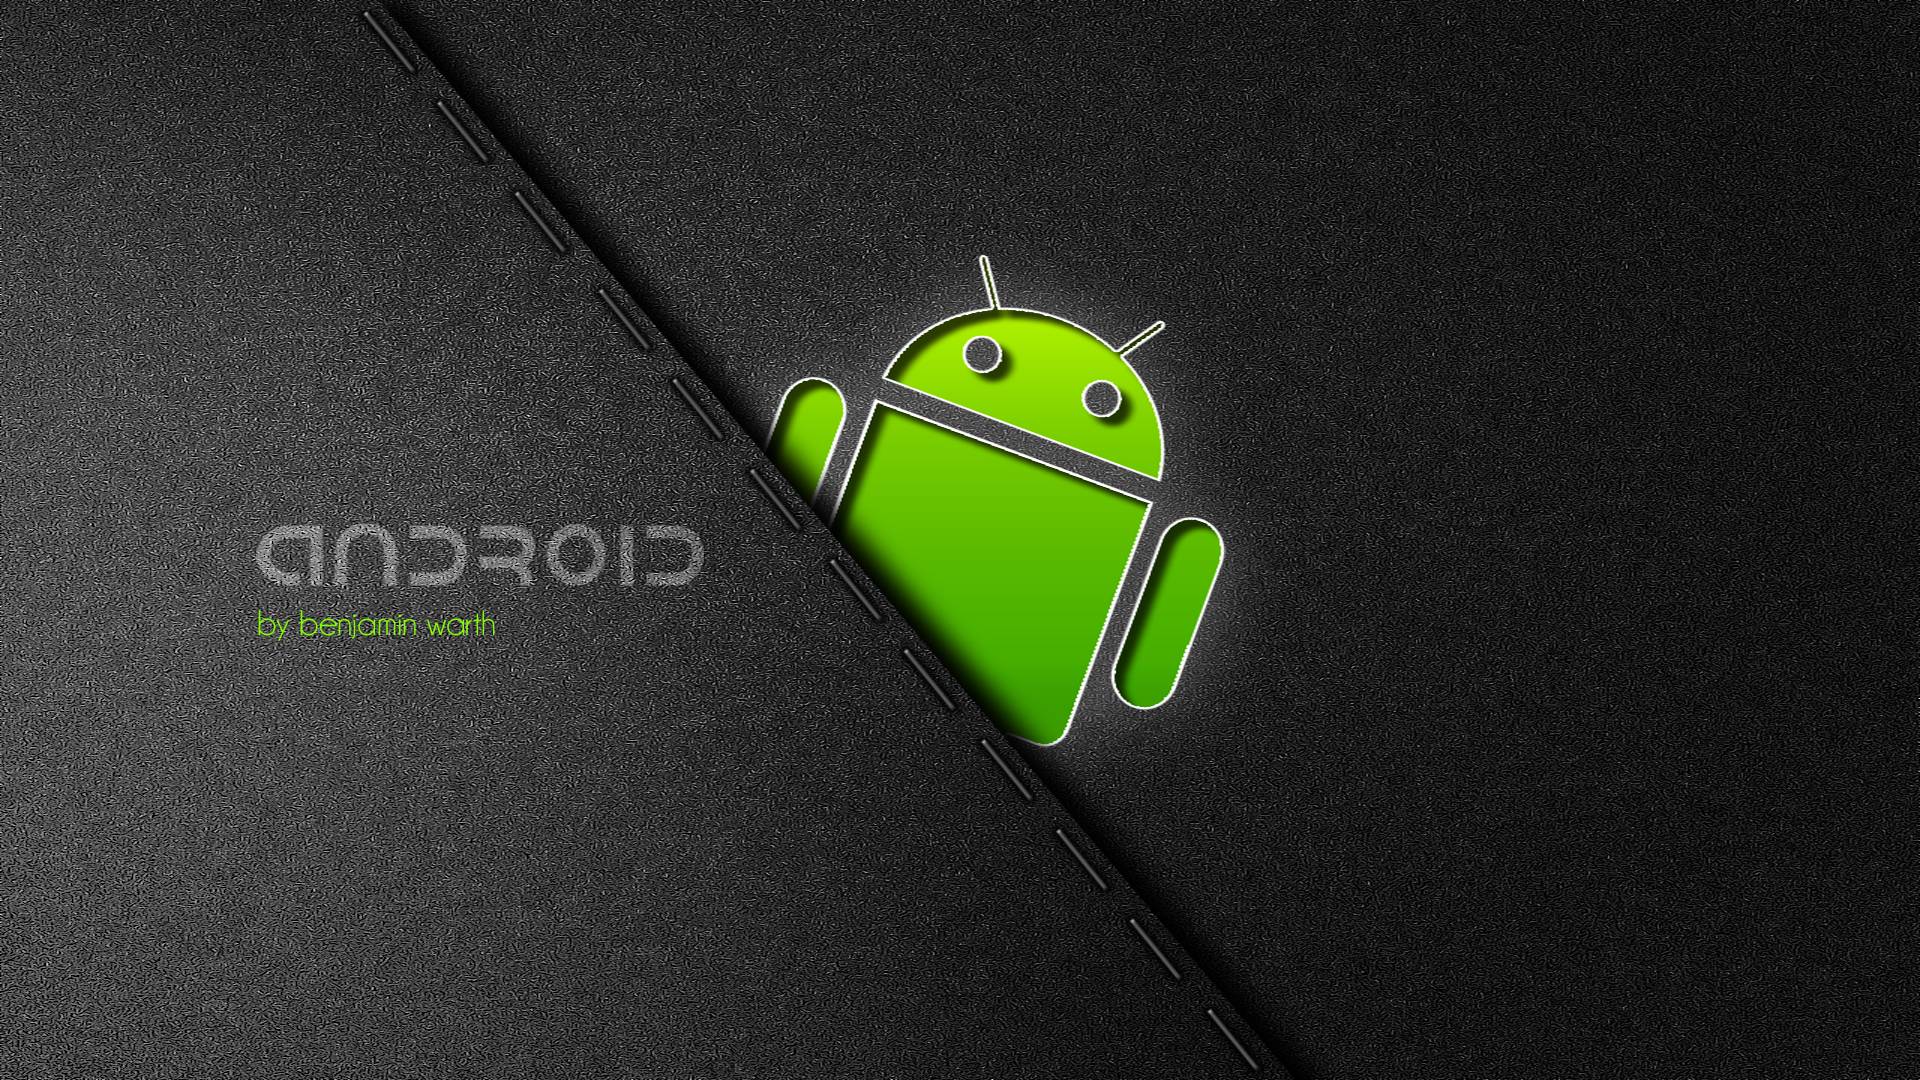 Android 05 HD Wallpaper For Desktop: Free Wallpaper For Androids